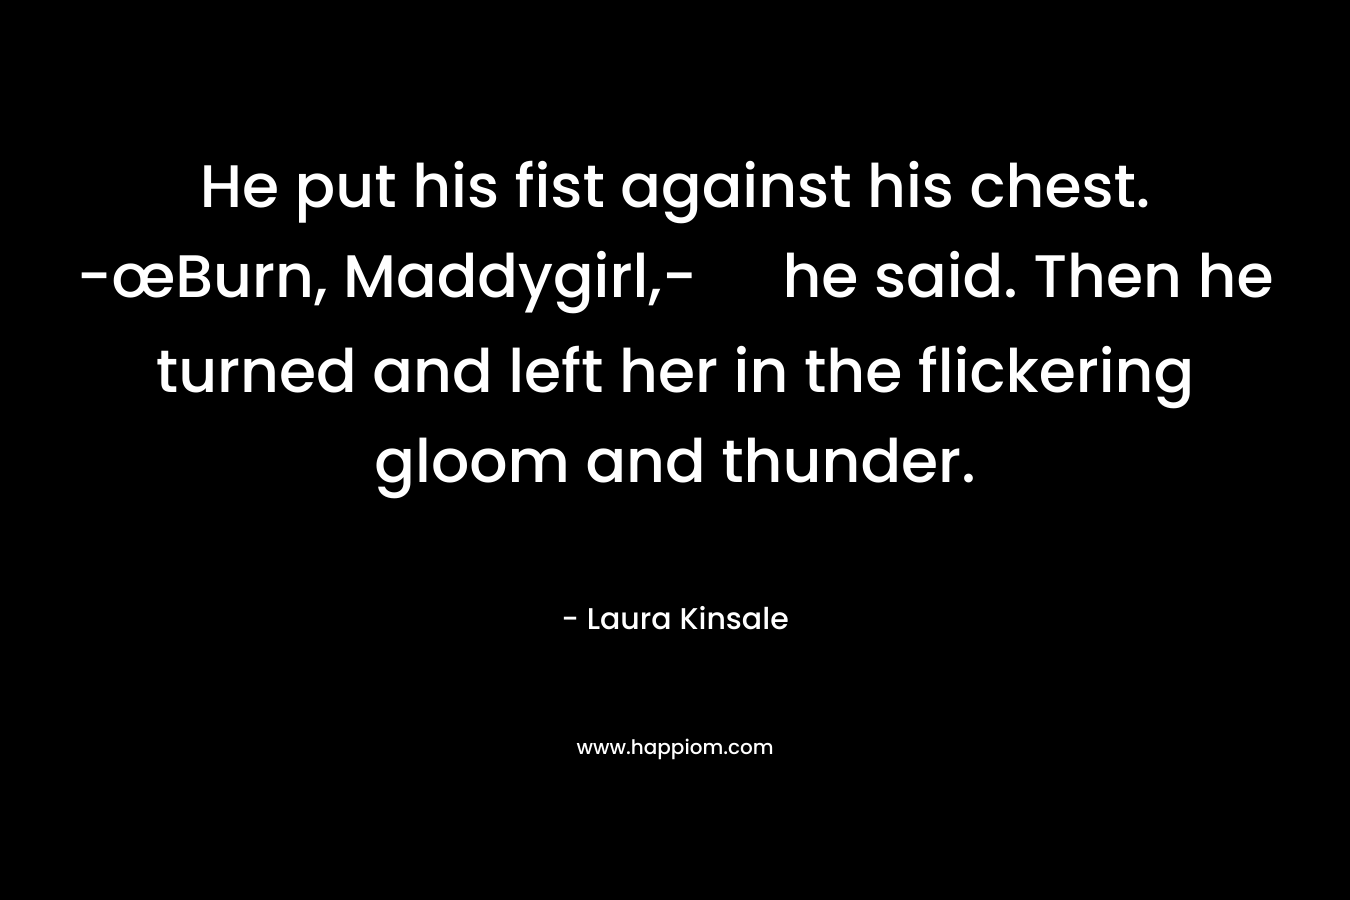 He put his fist against his chest. -œBurn, Maddygirl,- he said. Then he turned and left her in the flickering gloom and thunder. – Laura Kinsale